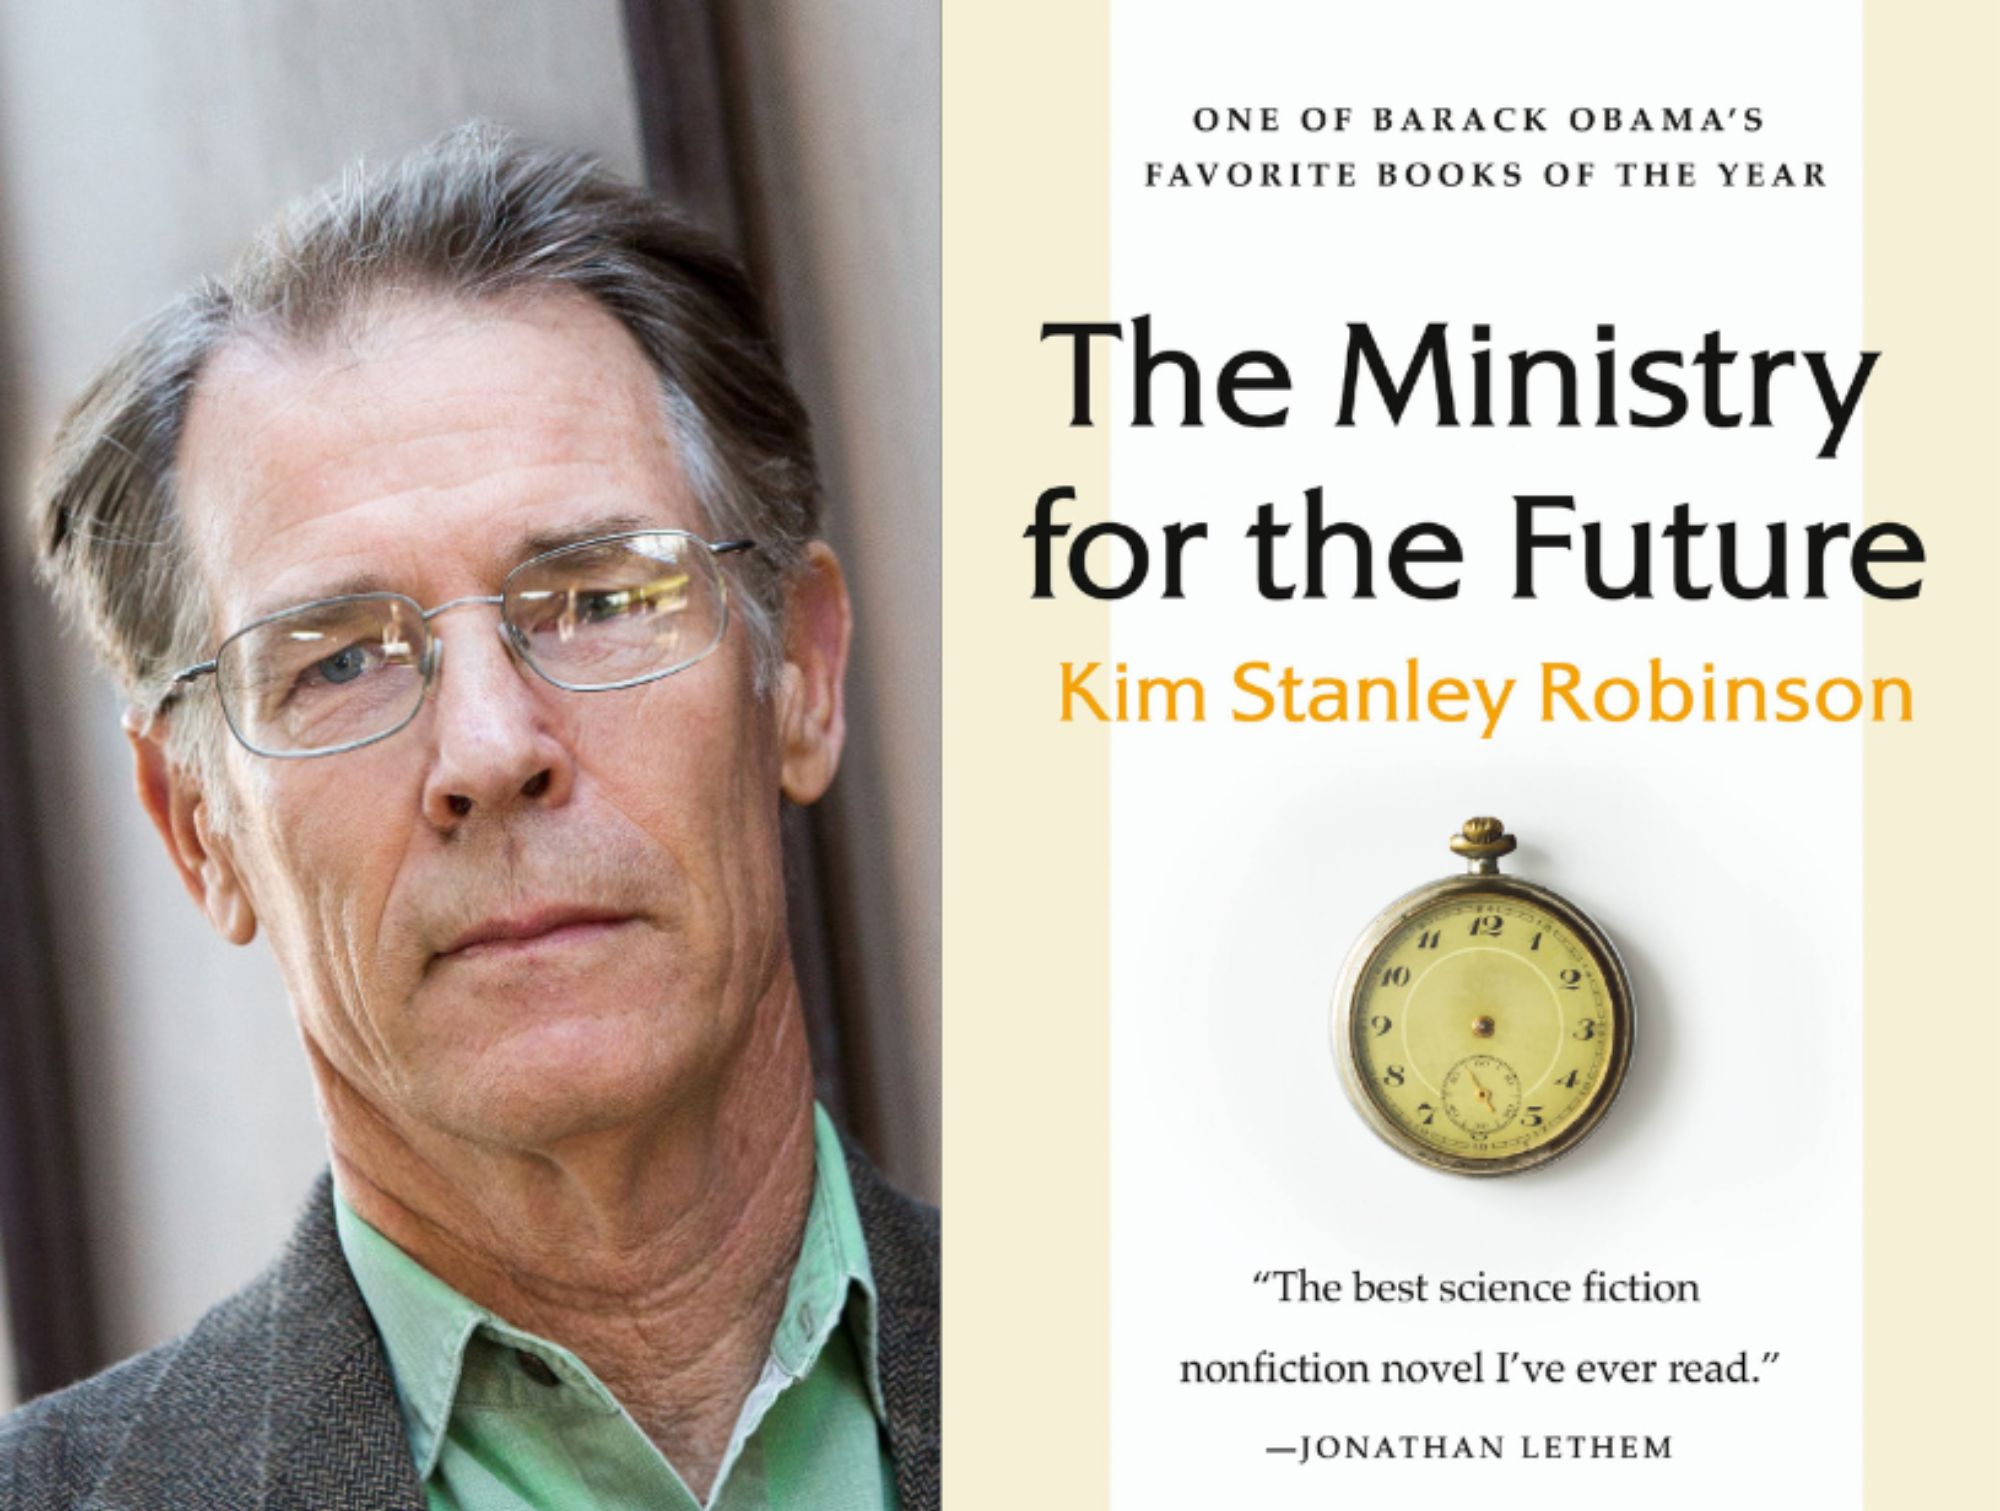 Kim Stanley Robinson and book cover